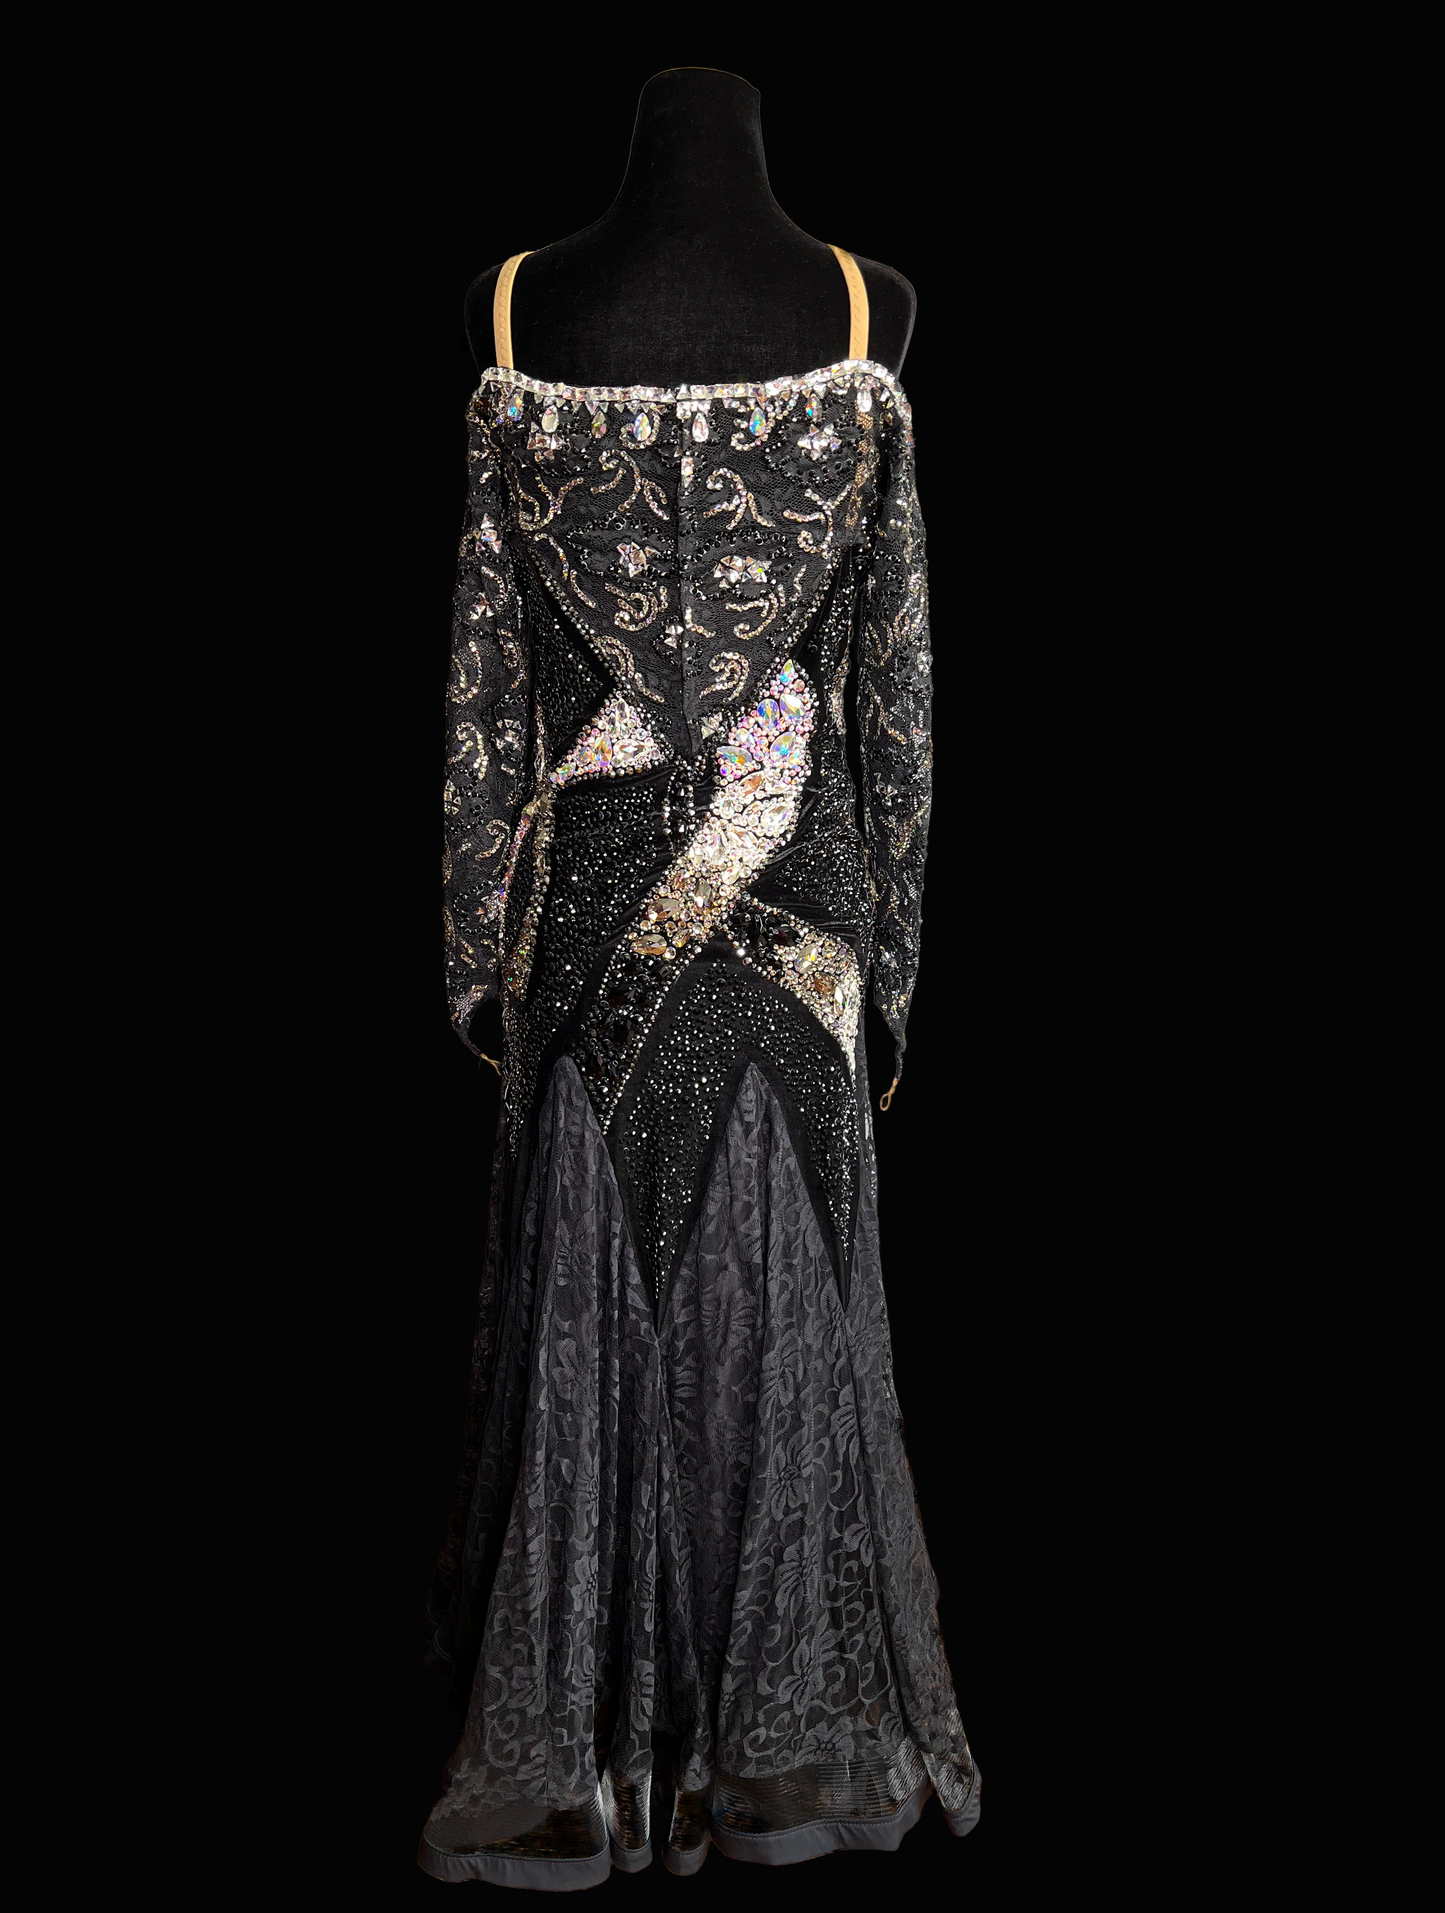 Resale Artistry in Motion Off-the-Shoulder Black Lace and Velvet Smooth Ballroom Dress with Long Sleeves Sz M Smo166